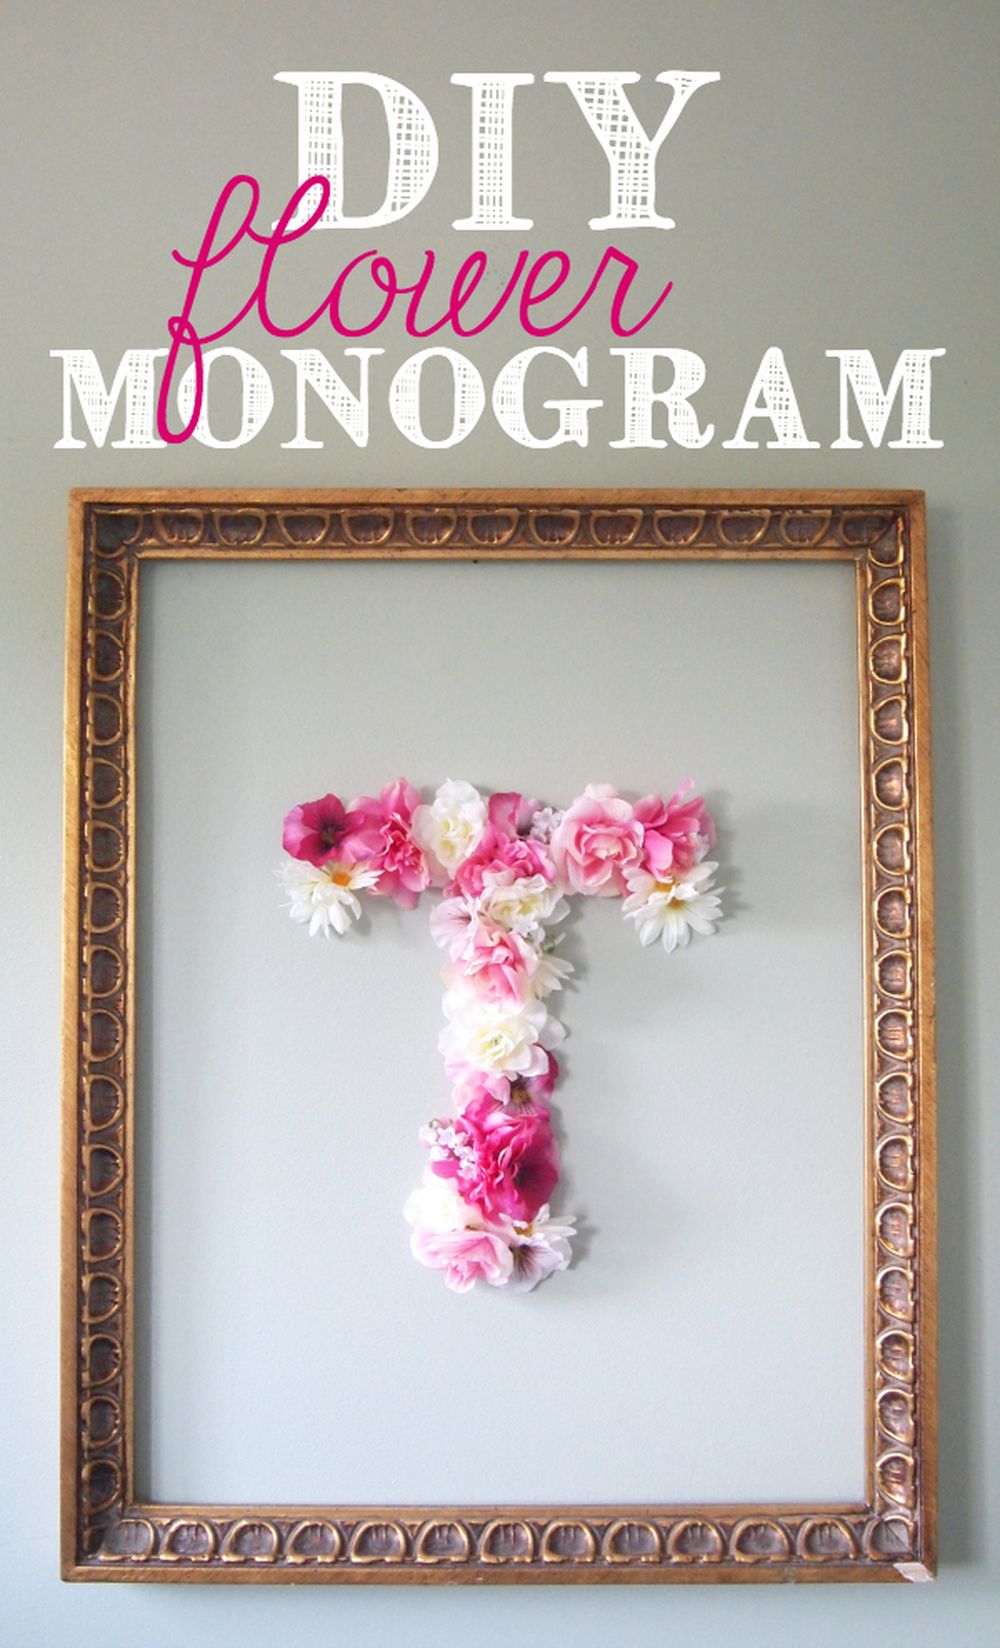 Diy faux flower monogram thoughtful gifts for wife